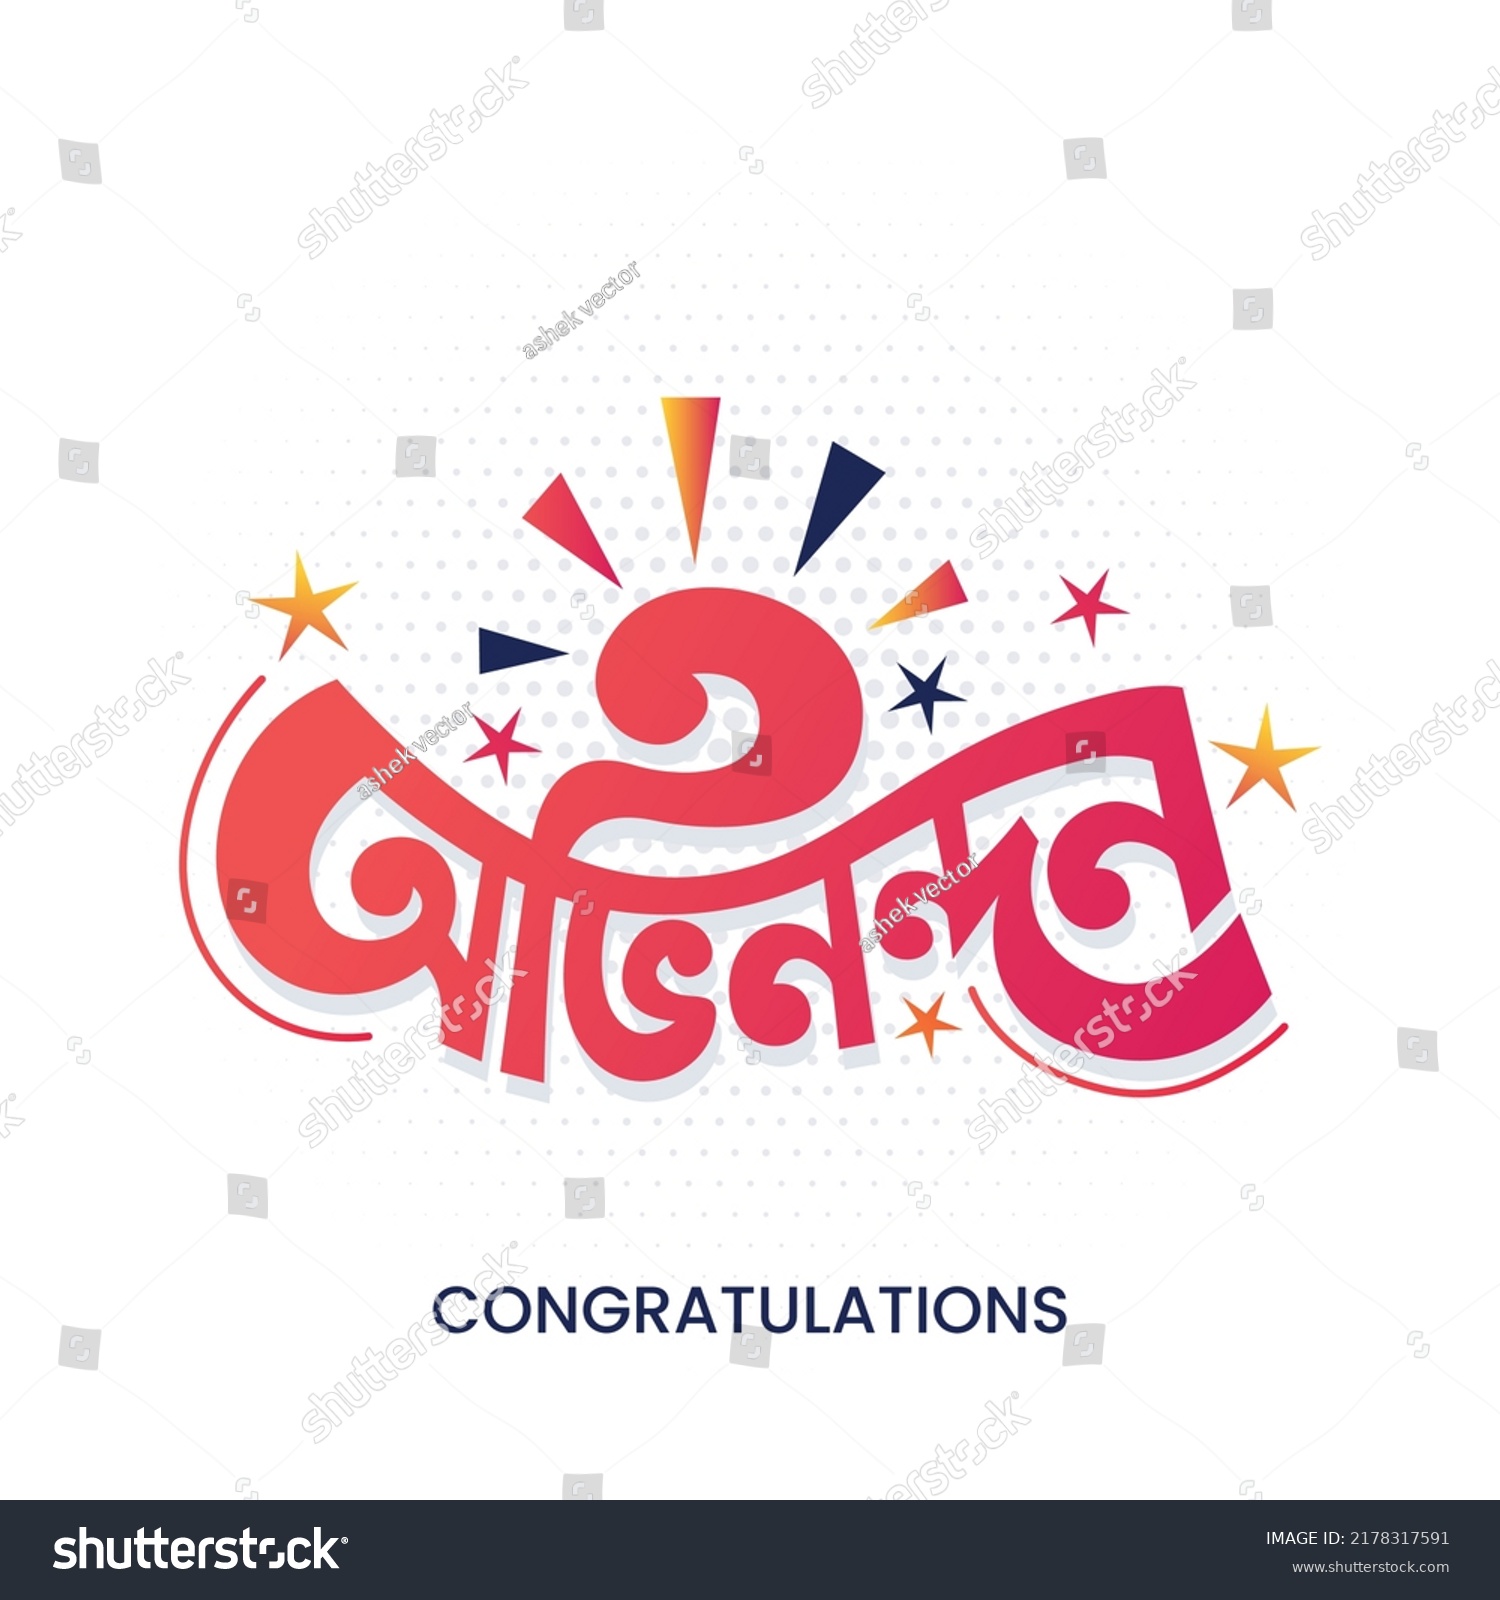 SVG of Congratulations Bangla Typography with colorful Confetti isolated view. Colorful background for greeting winning celebrations. cricket wishing creative bengali typography and calligraphy design. svg